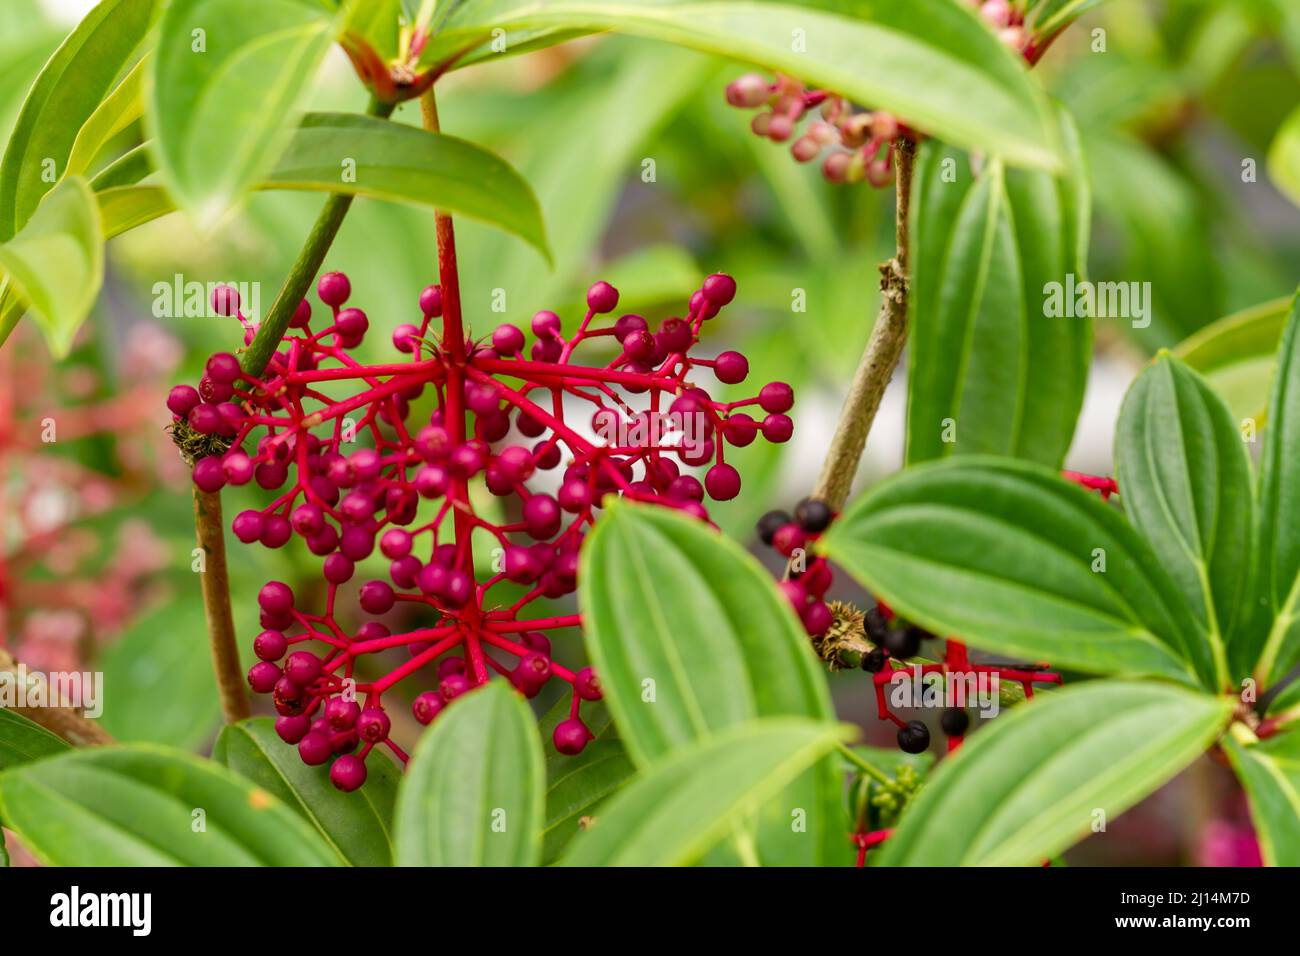 Medinilla plant with green leaves with round red flowers, blurred green foliage background, natural concept Stock Photo